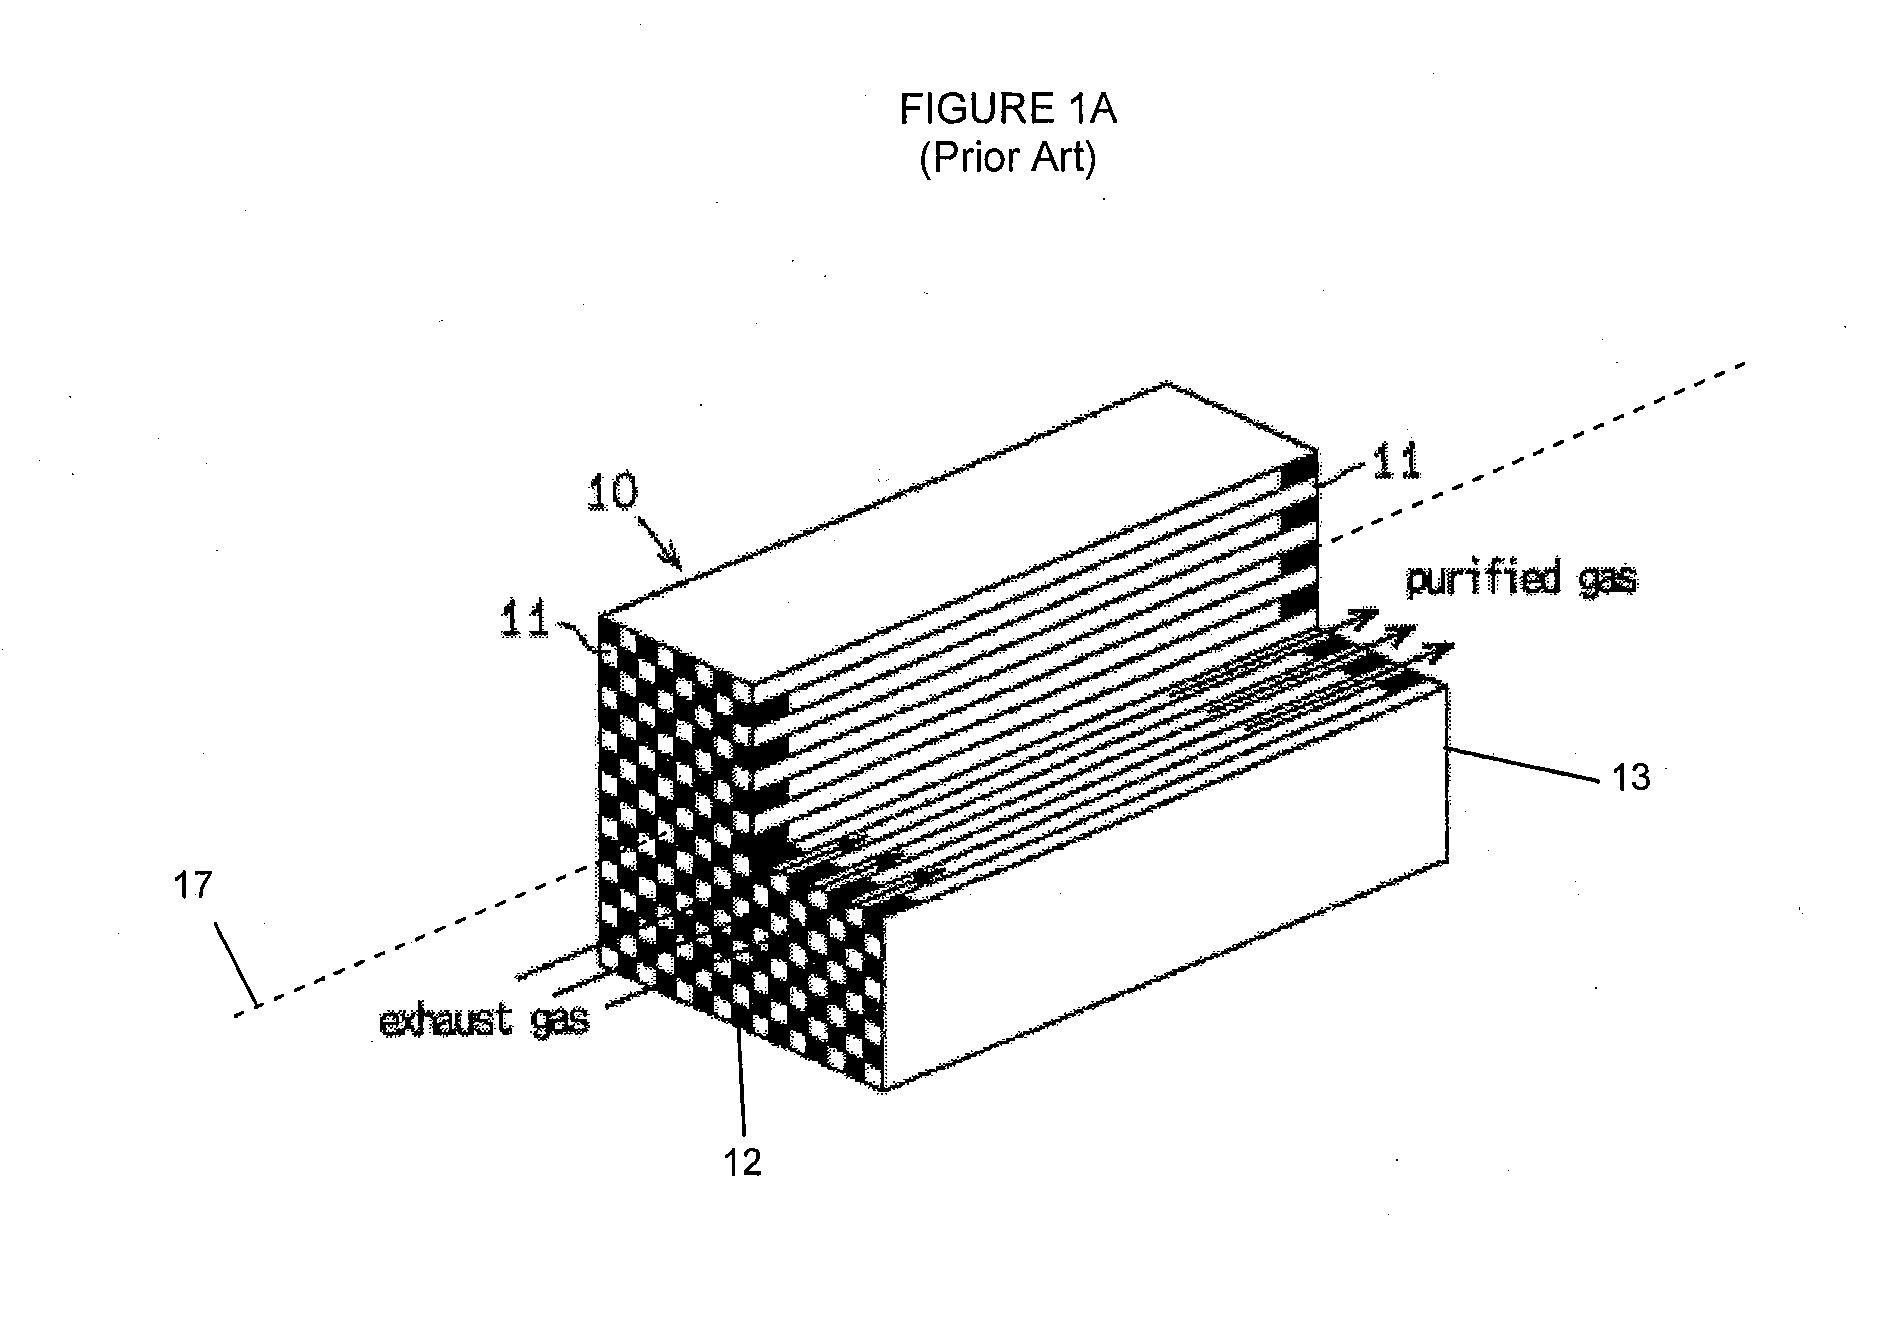 Zoned catalytic filters for treatment of exhaust gas